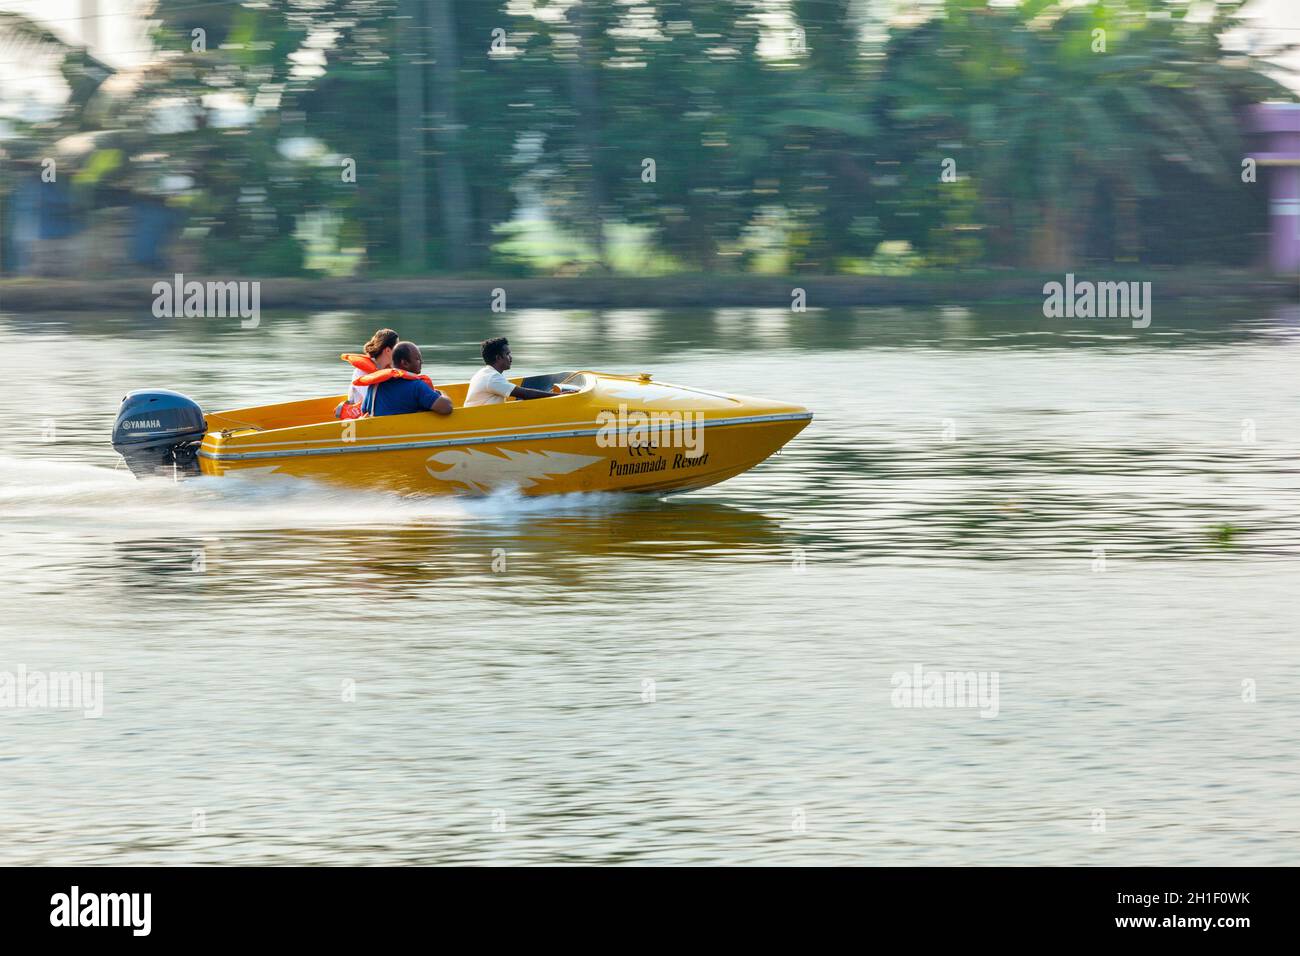 KERALA, INDIA - MAY 5, 2010: Unidentified foreing tourists in speed boat in backwaters. Kerala backwaters are both major tourist attraction and integr Stock Photo